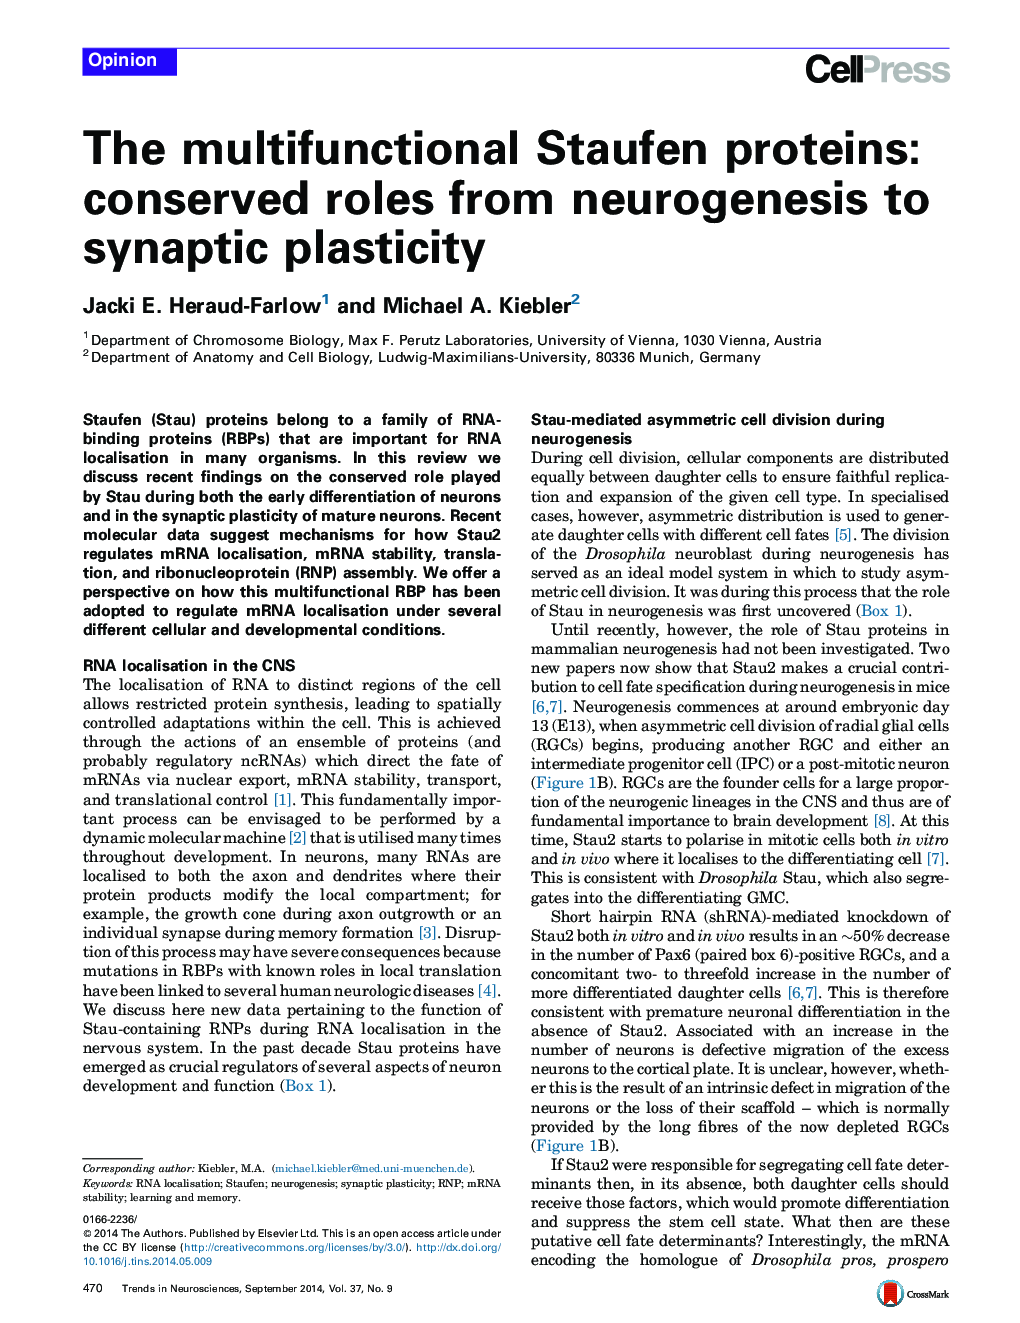 The multifunctional Staufen proteins: conserved roles from neurogenesis to synaptic plasticity